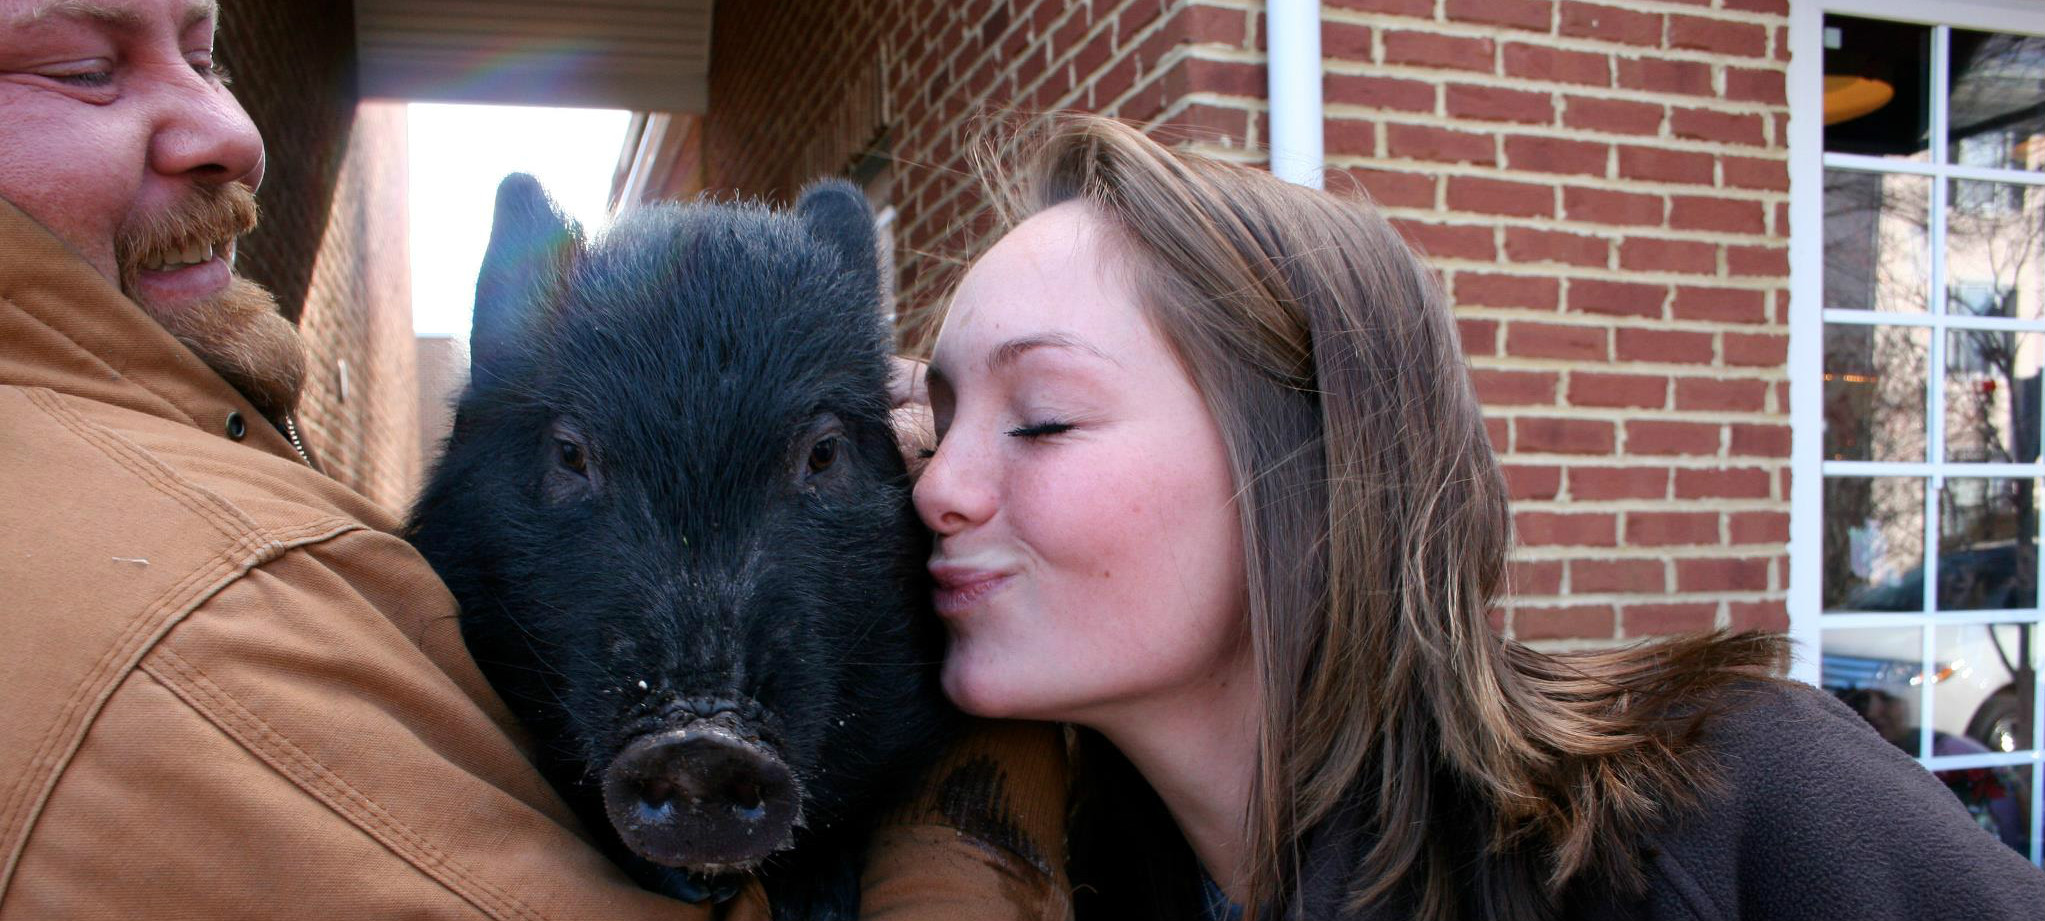 Easton's BBQ Joint Invites You to Kiss a Pig for Charity